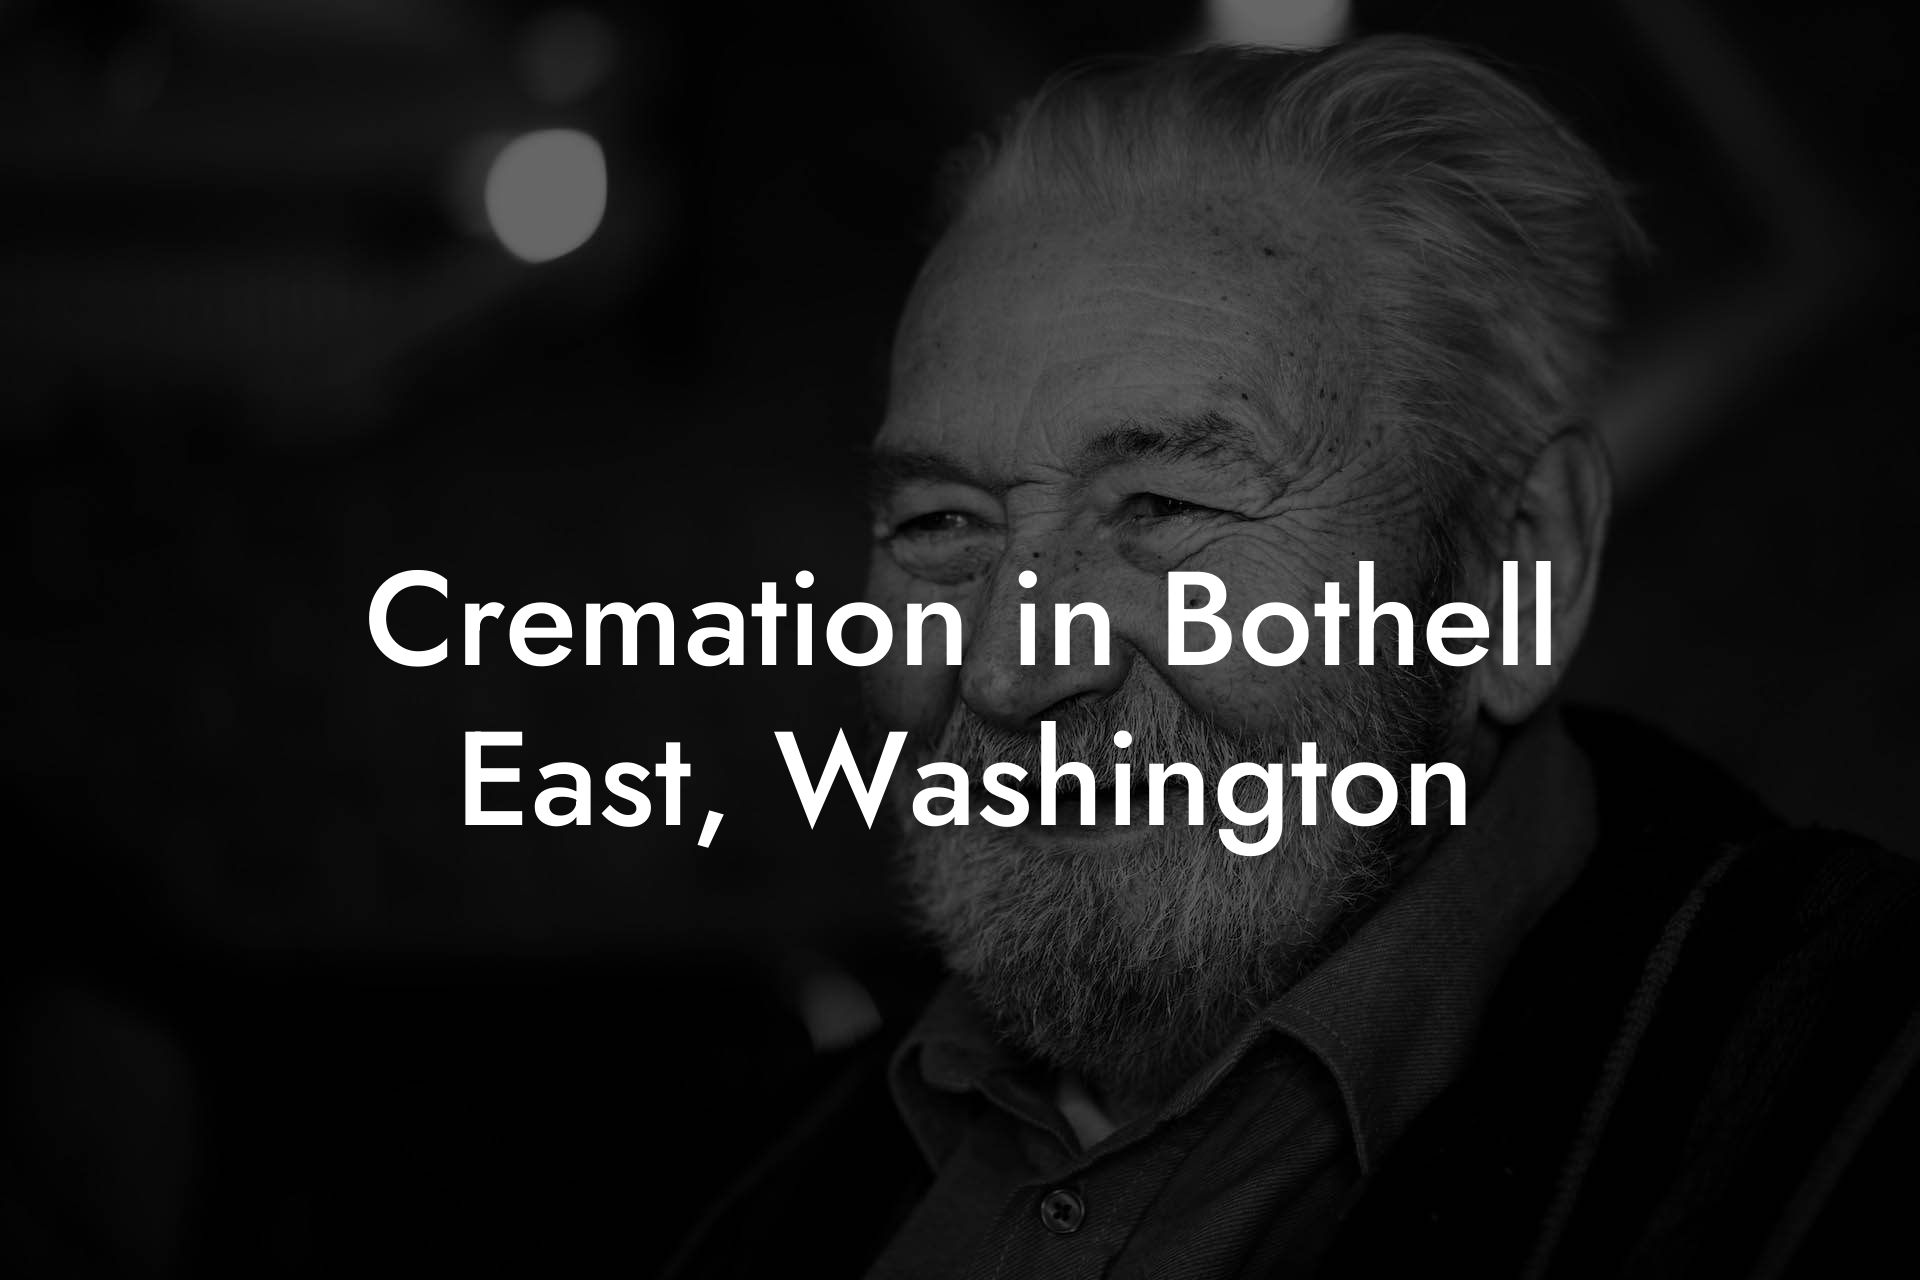 Cremation in Bothell East, Washington